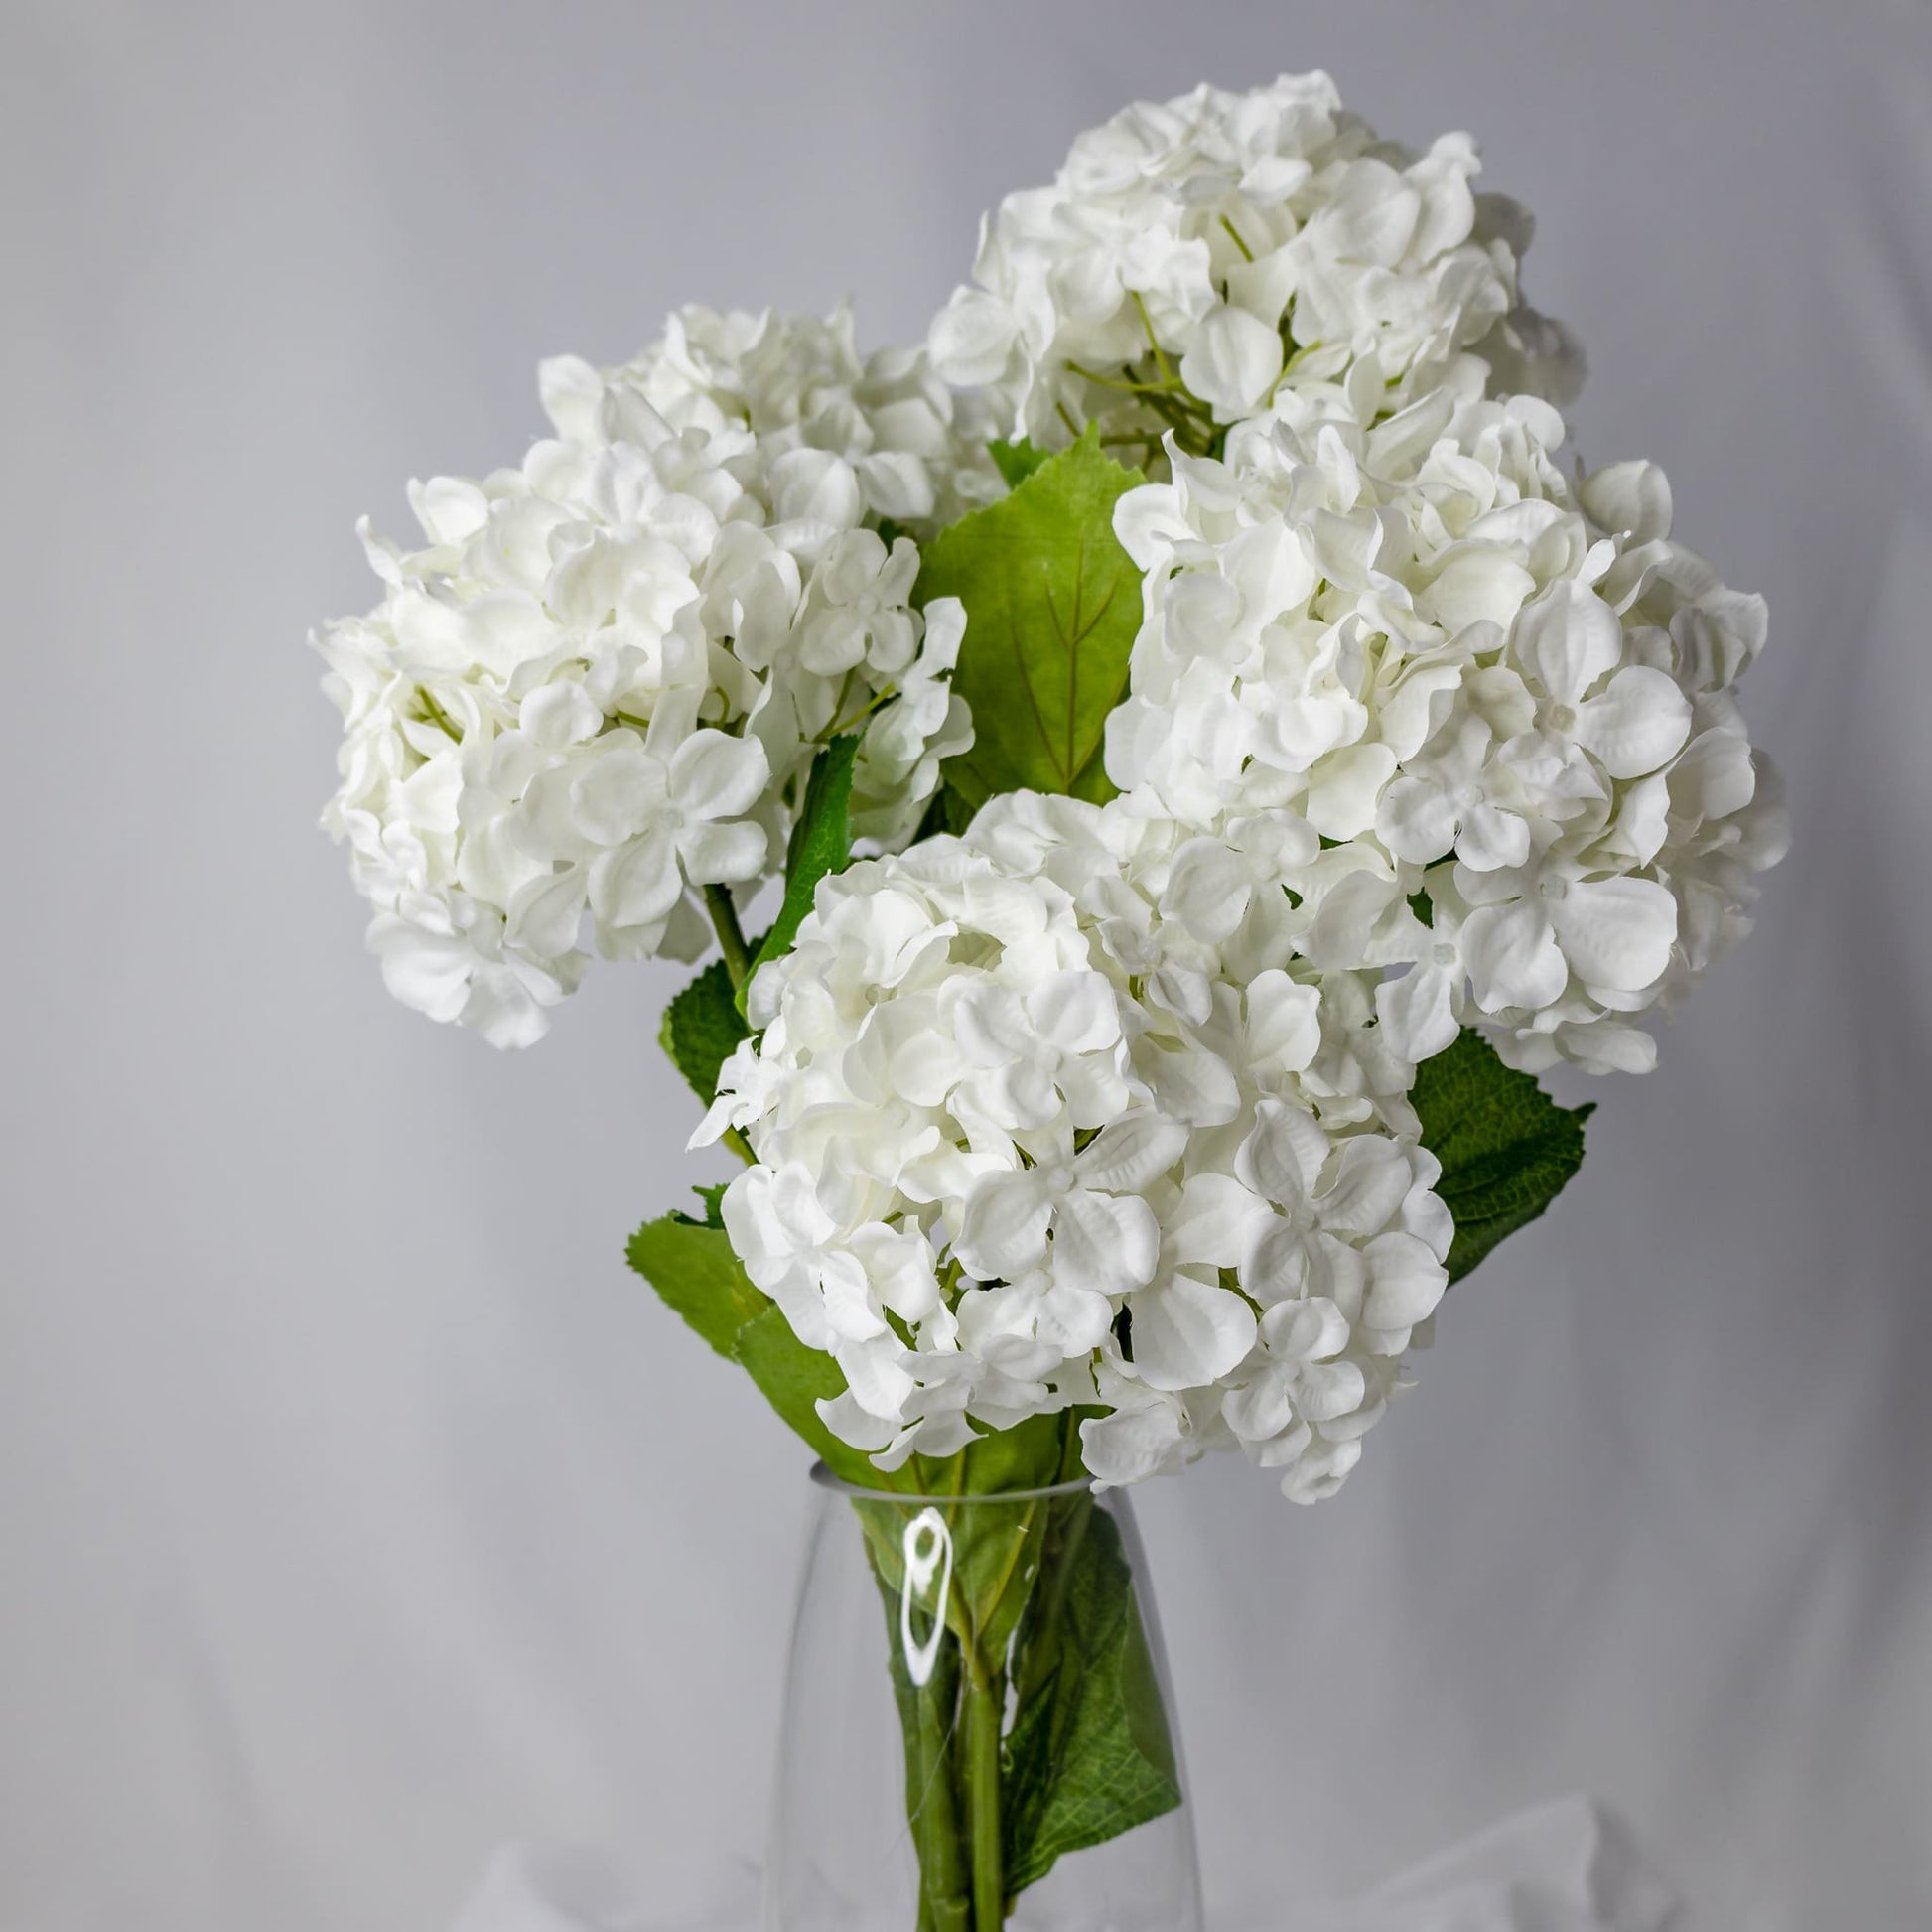 artificial white soft touch hydrangea flowers placed in transparent glass vase